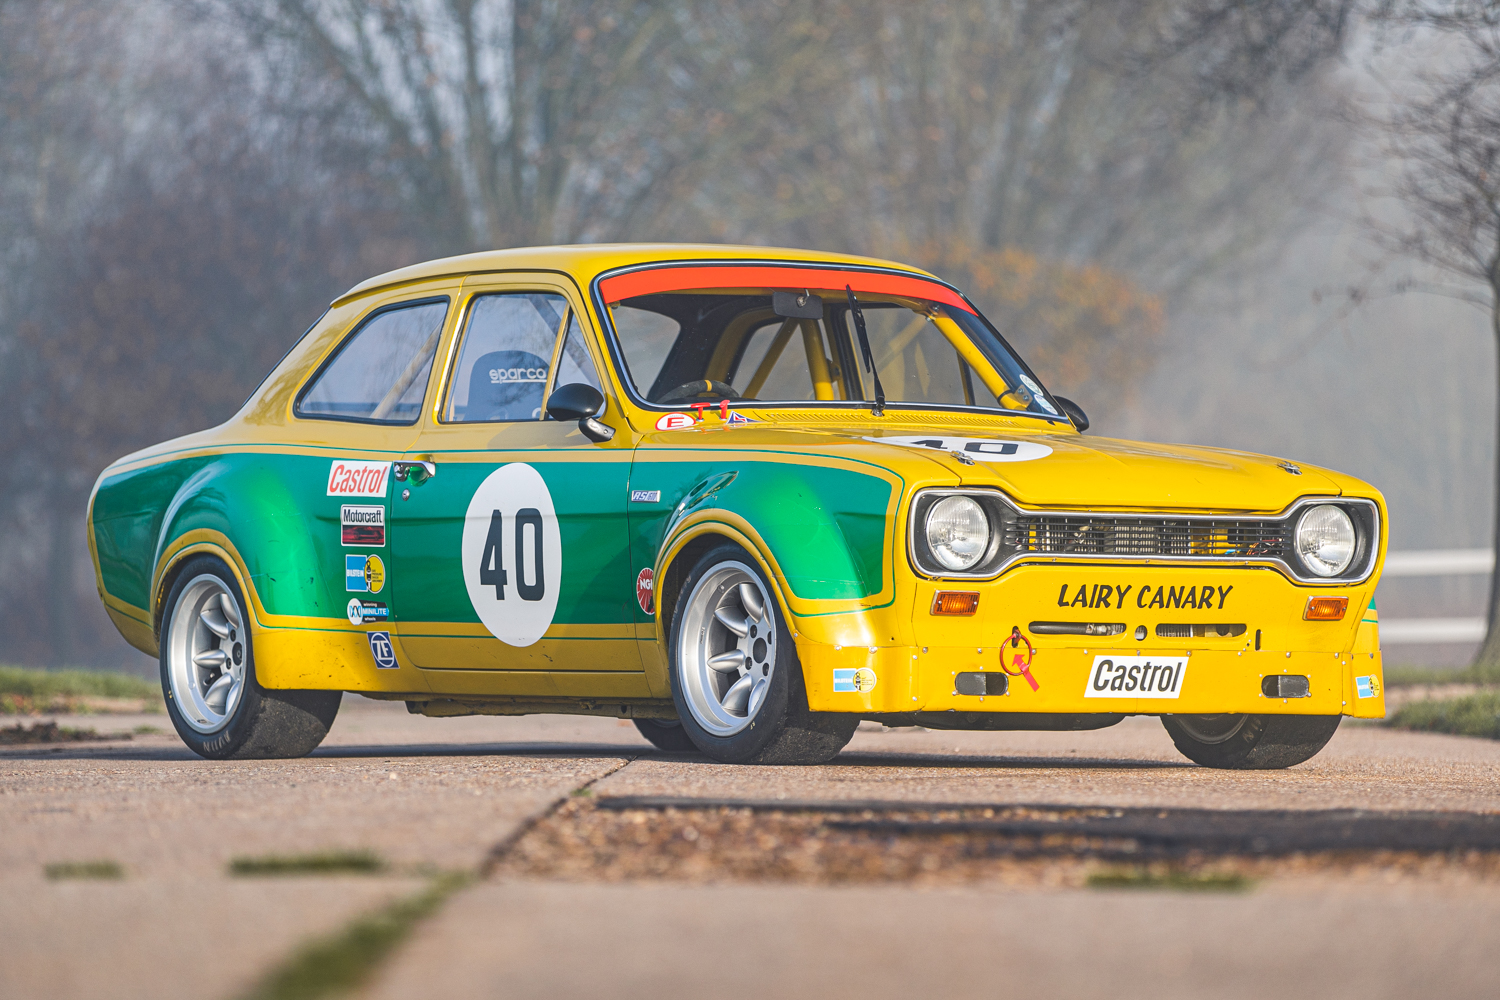 1971 Ford Escort RS1600 'Lairy Canary' (The Mike Bell Collection)